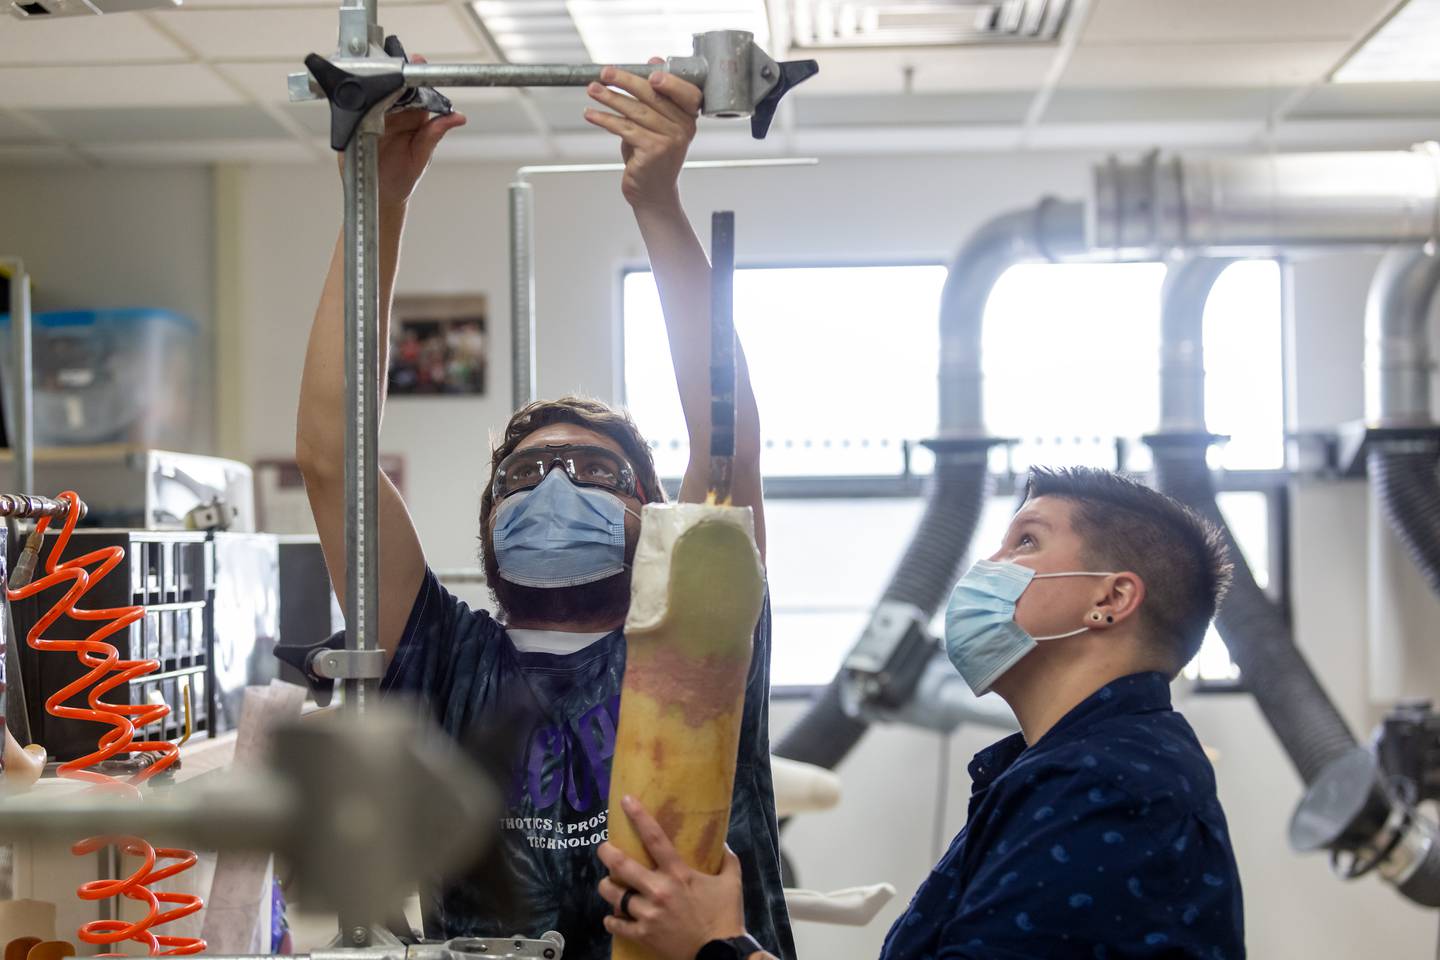 Alisha Brennon, professor of prosthetic technology at Joliet Junior College, assists a student with an OPT project. Brennon, a graduate of JJC's OPT program, has also collaborated with JJC’s veterinary medical technology program to support orthotics and prosthetics for animals. Brennon formerly worked for the Shirley Ryan Ability Lab in Chicago.